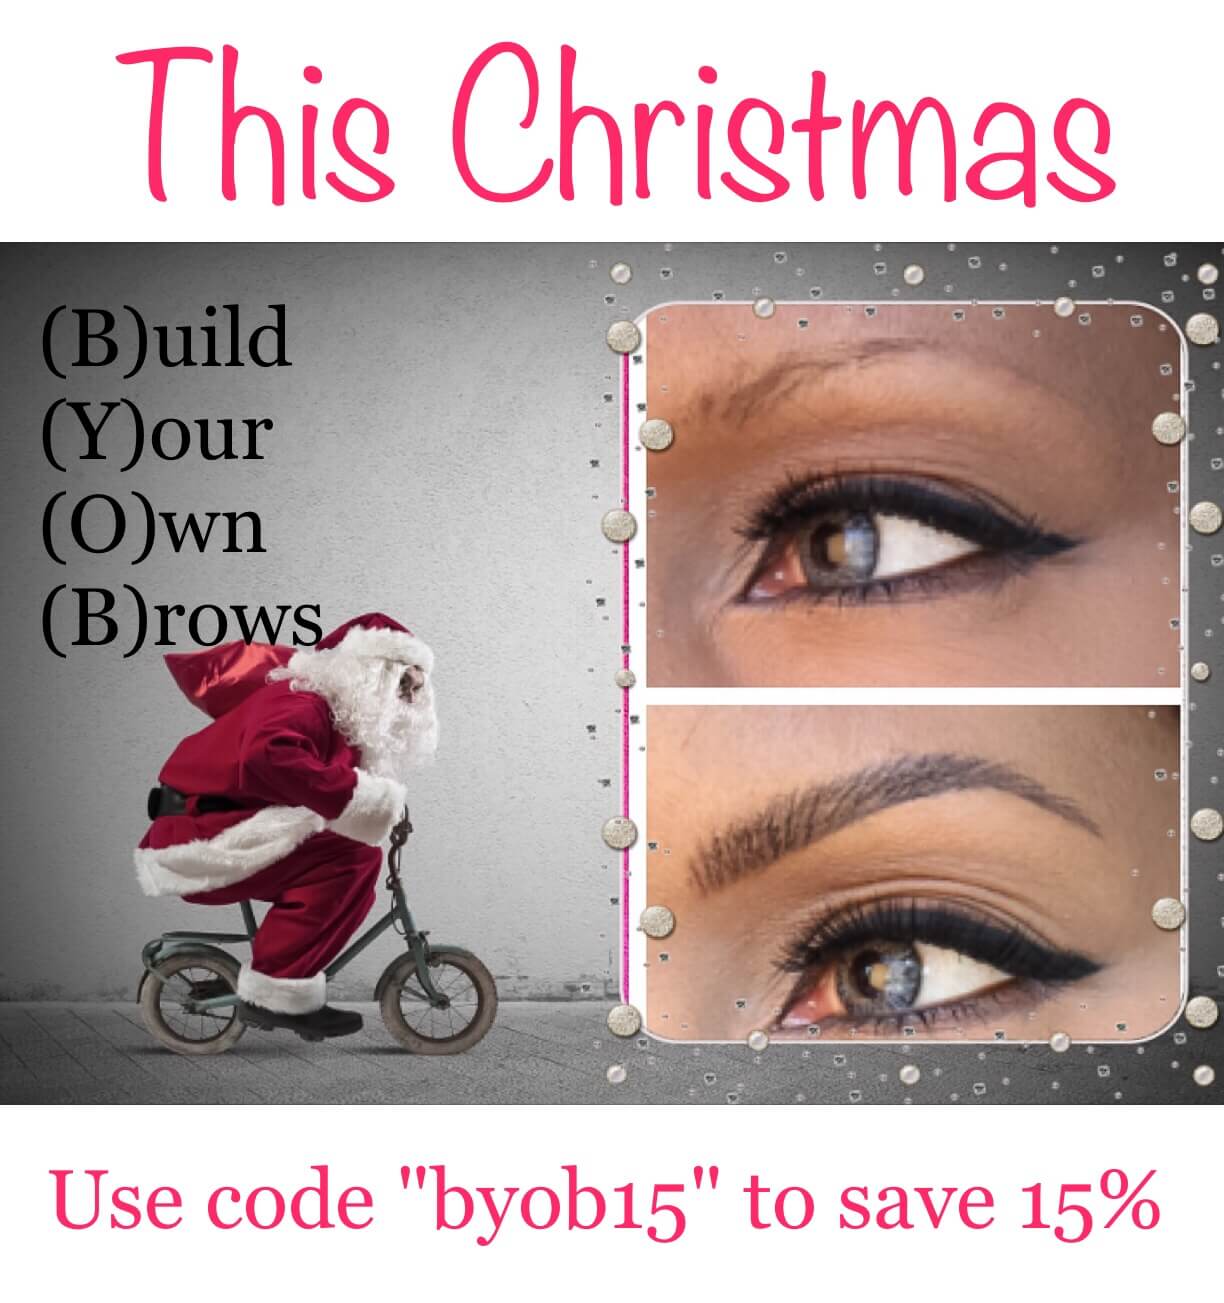 B.Y.O.B. and receive 15% off